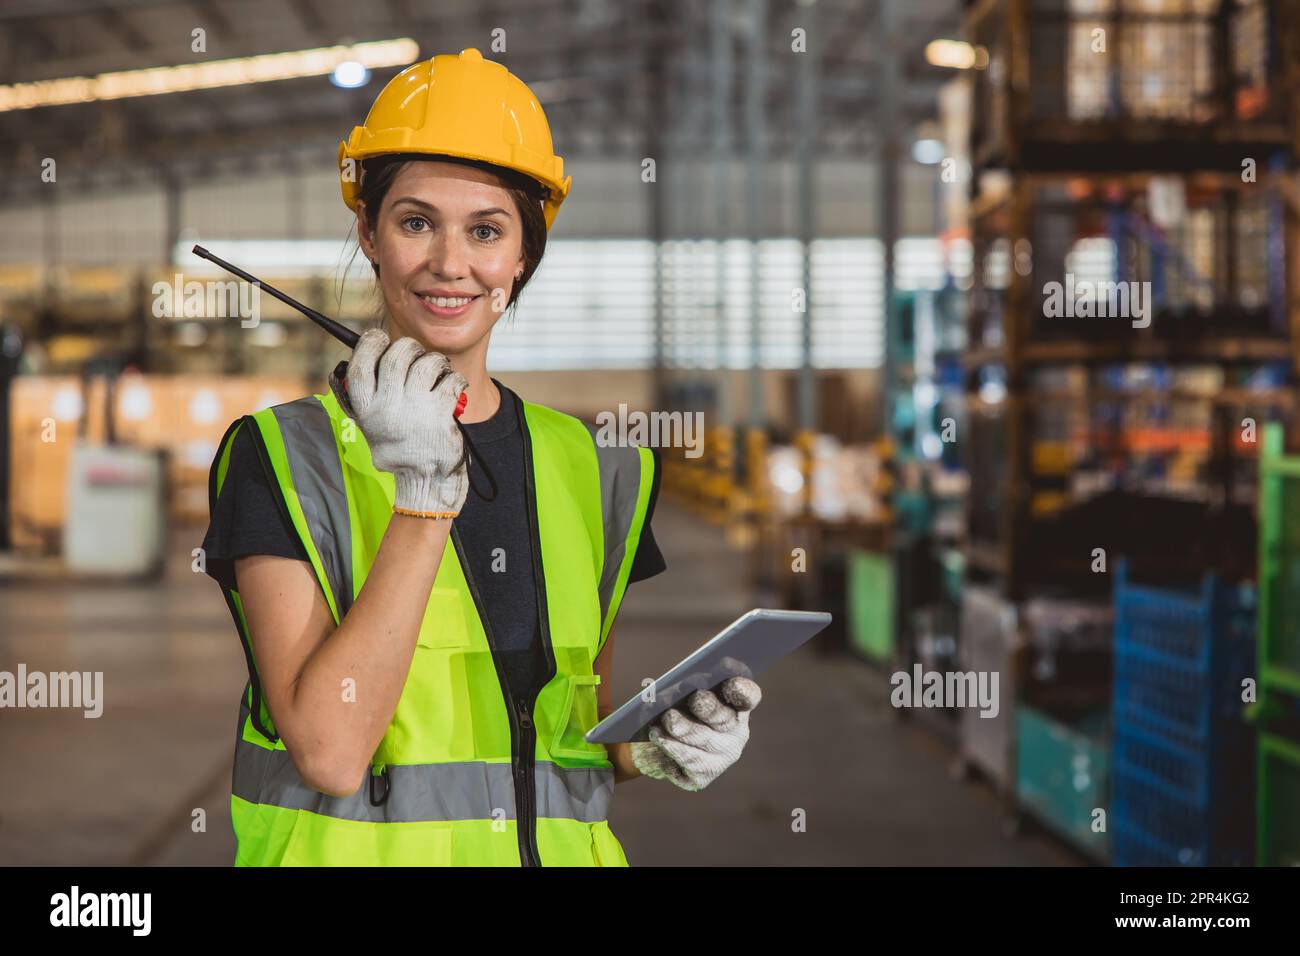 portrait working woman staff worker inventory management supervisor team work operate warehouse products shipping control job. Stock Photo